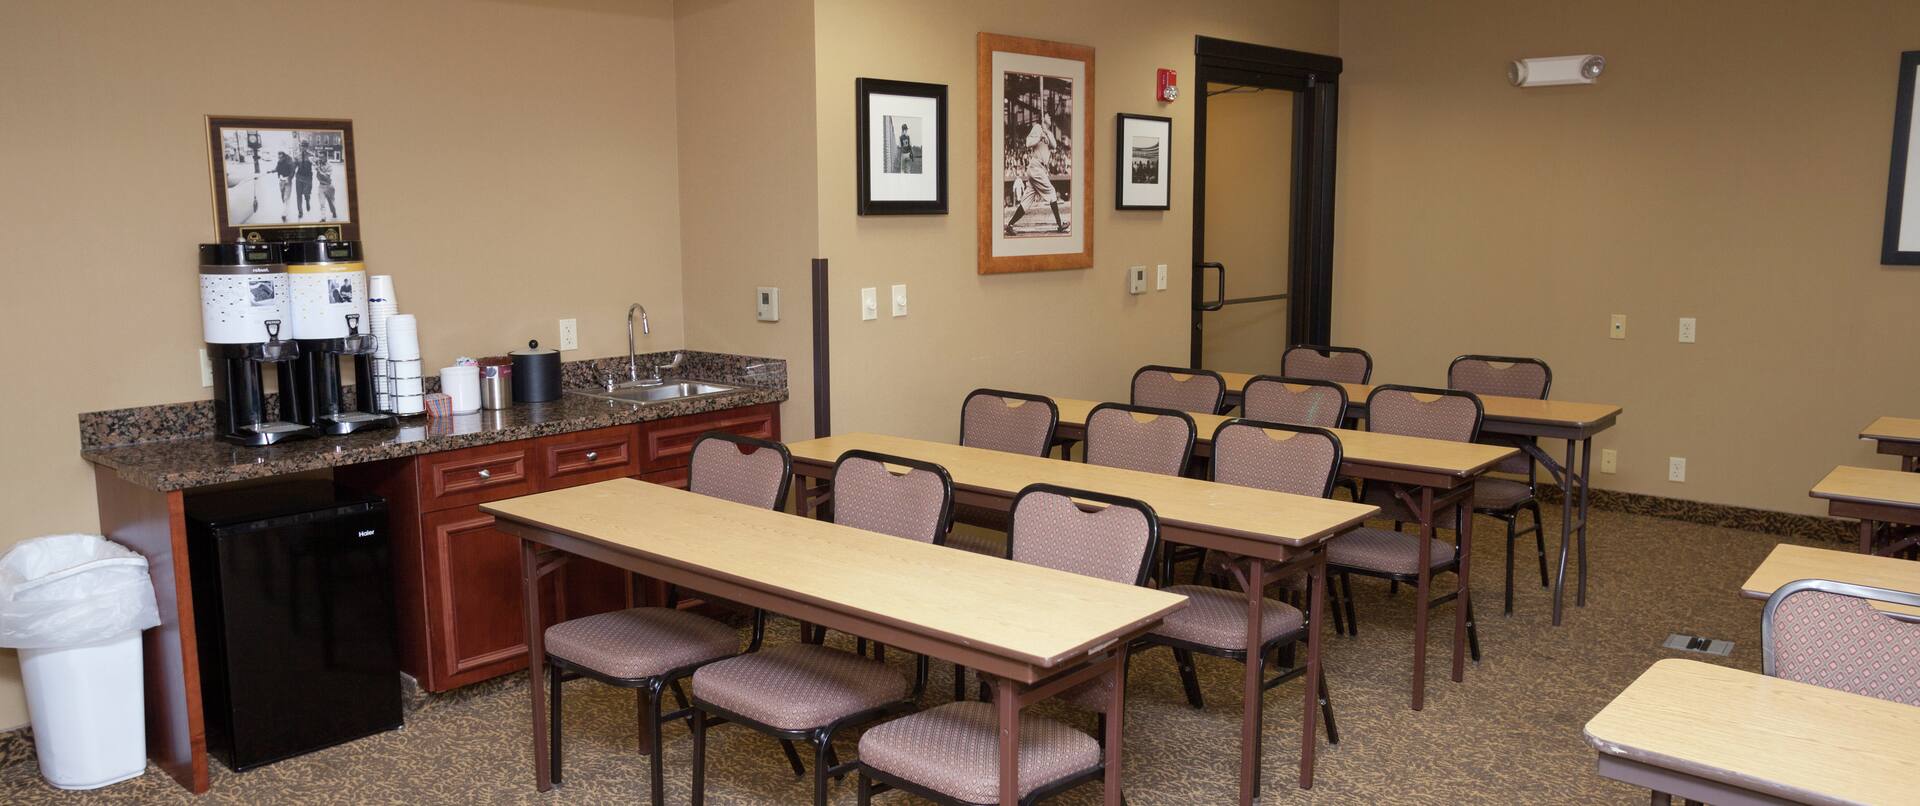 Meeting Room with Coffee Station